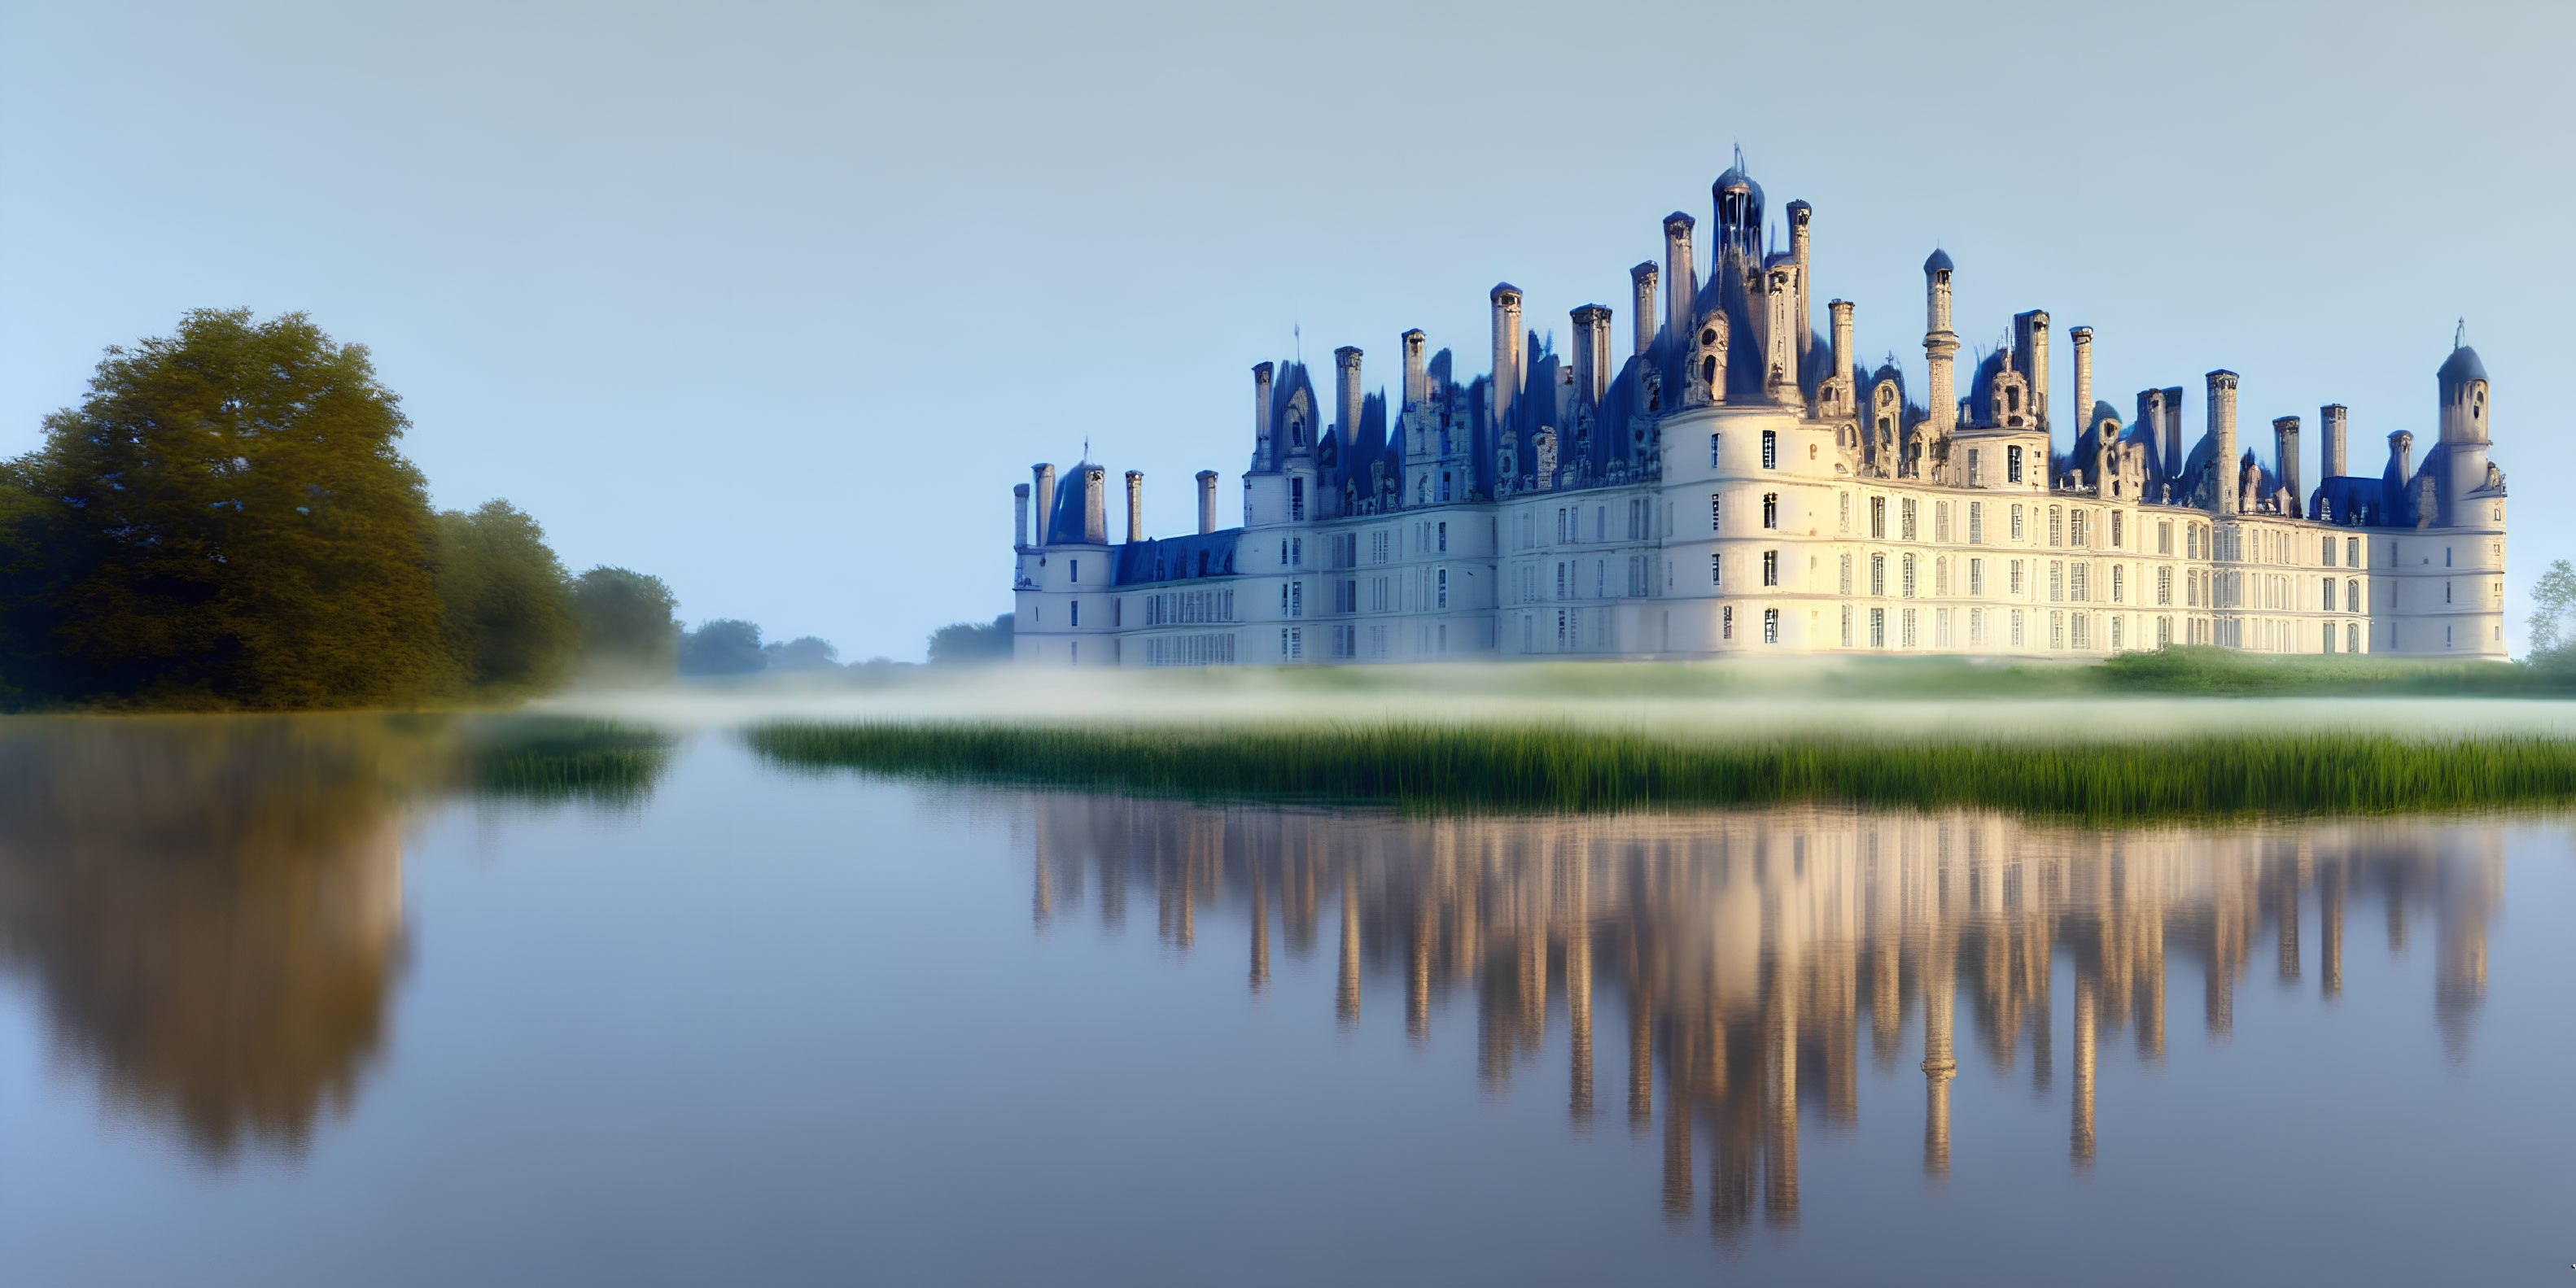 Majestic castle with spires reflected in serene river in foggy landscape